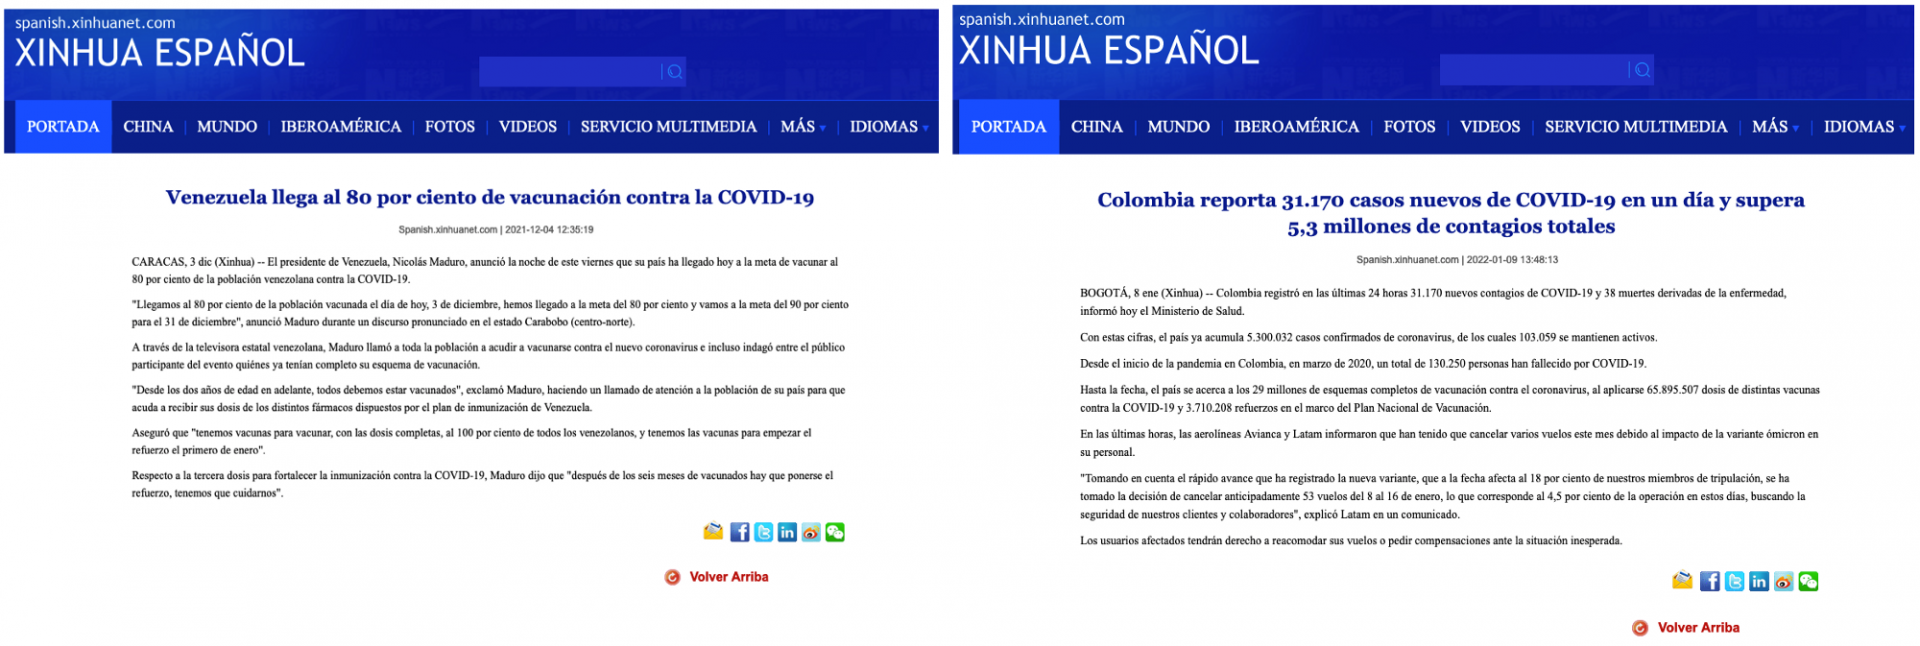 Screencaps of Xinhua Español’s coverage of Venezuela and Colombia. On the left, “Venezuela Reaches 80 percent Vaccination against COVID-19”. On the right, “Colombia reports 31,170 new COVID-19 cases in a single day and more than 5.3 million total infections.” 